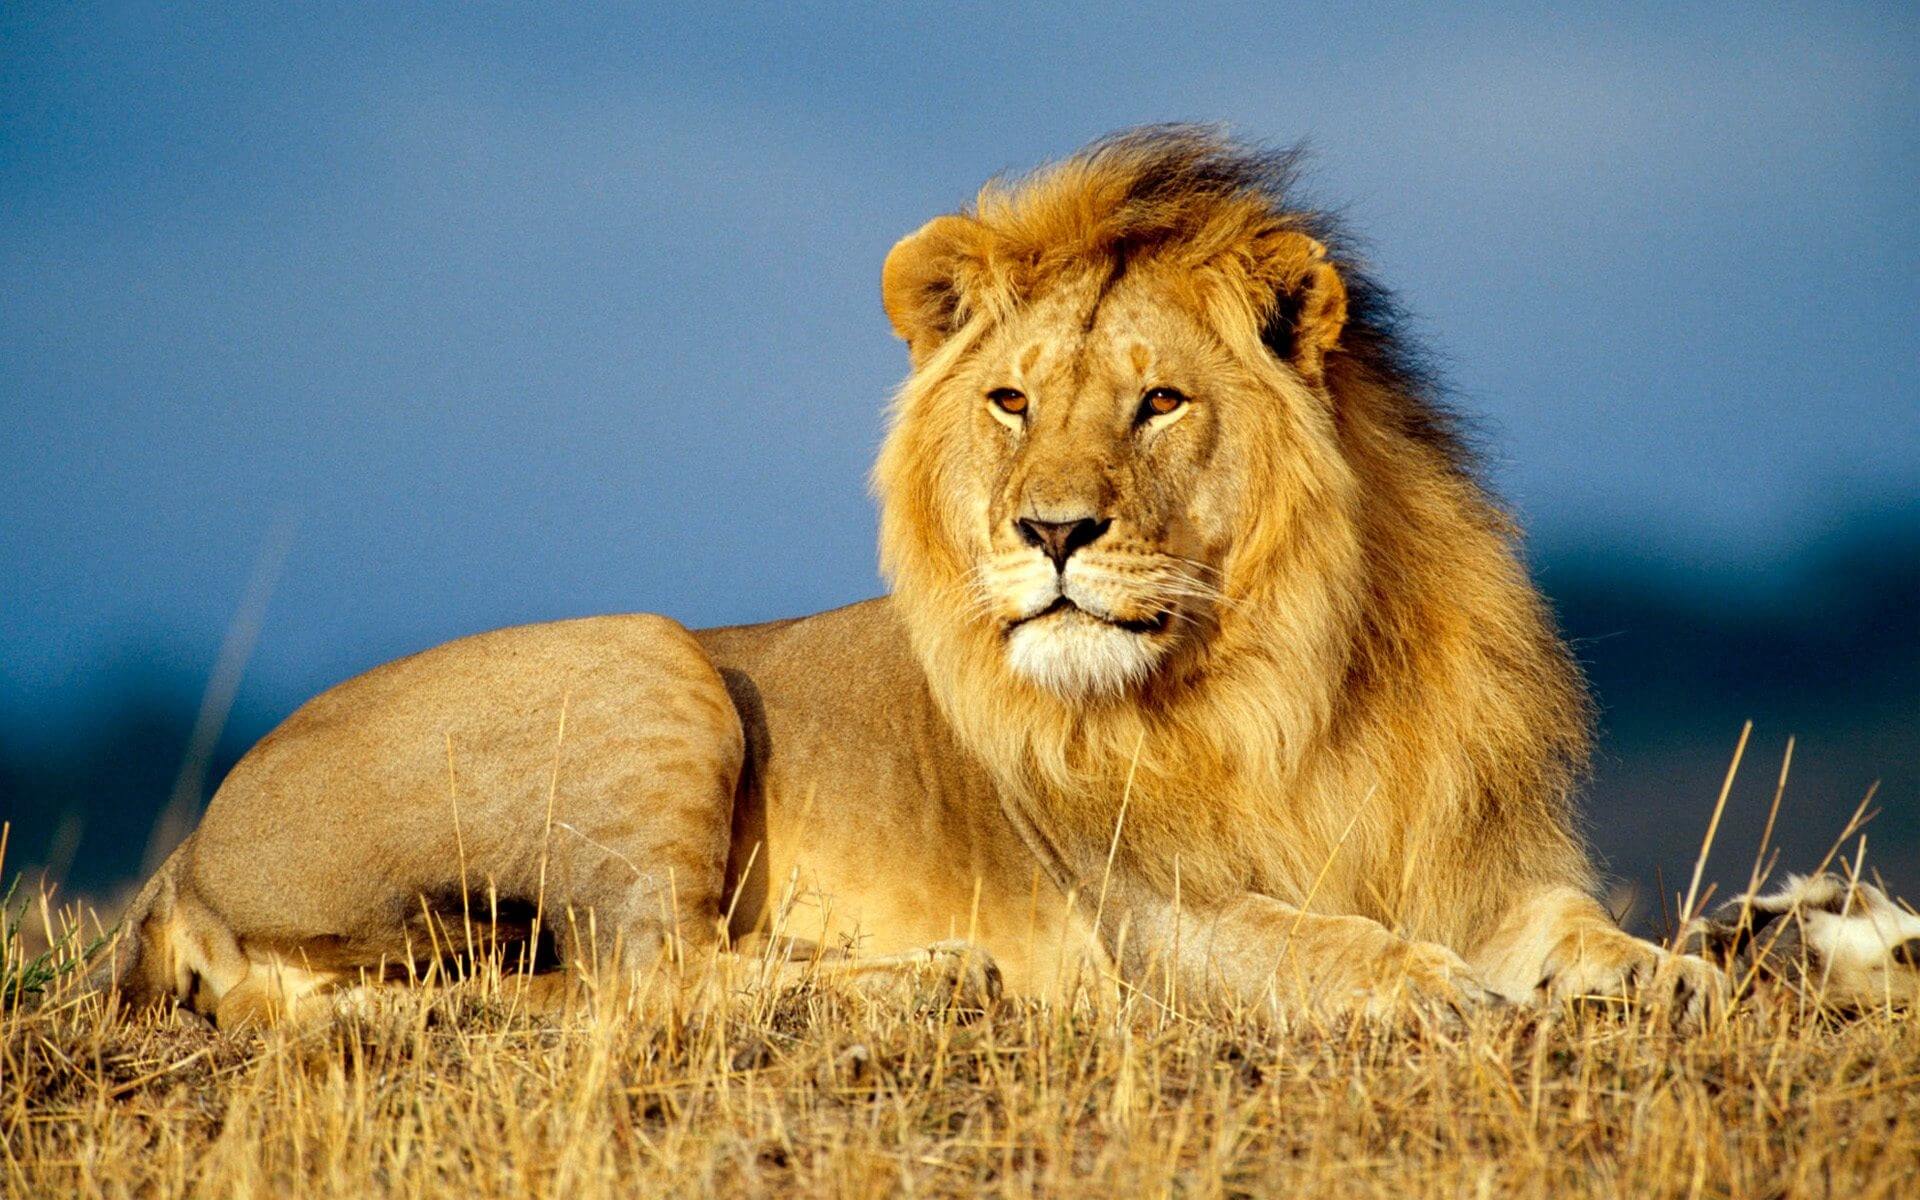 Gir Lion Deaths: A clarion call to save the Pride